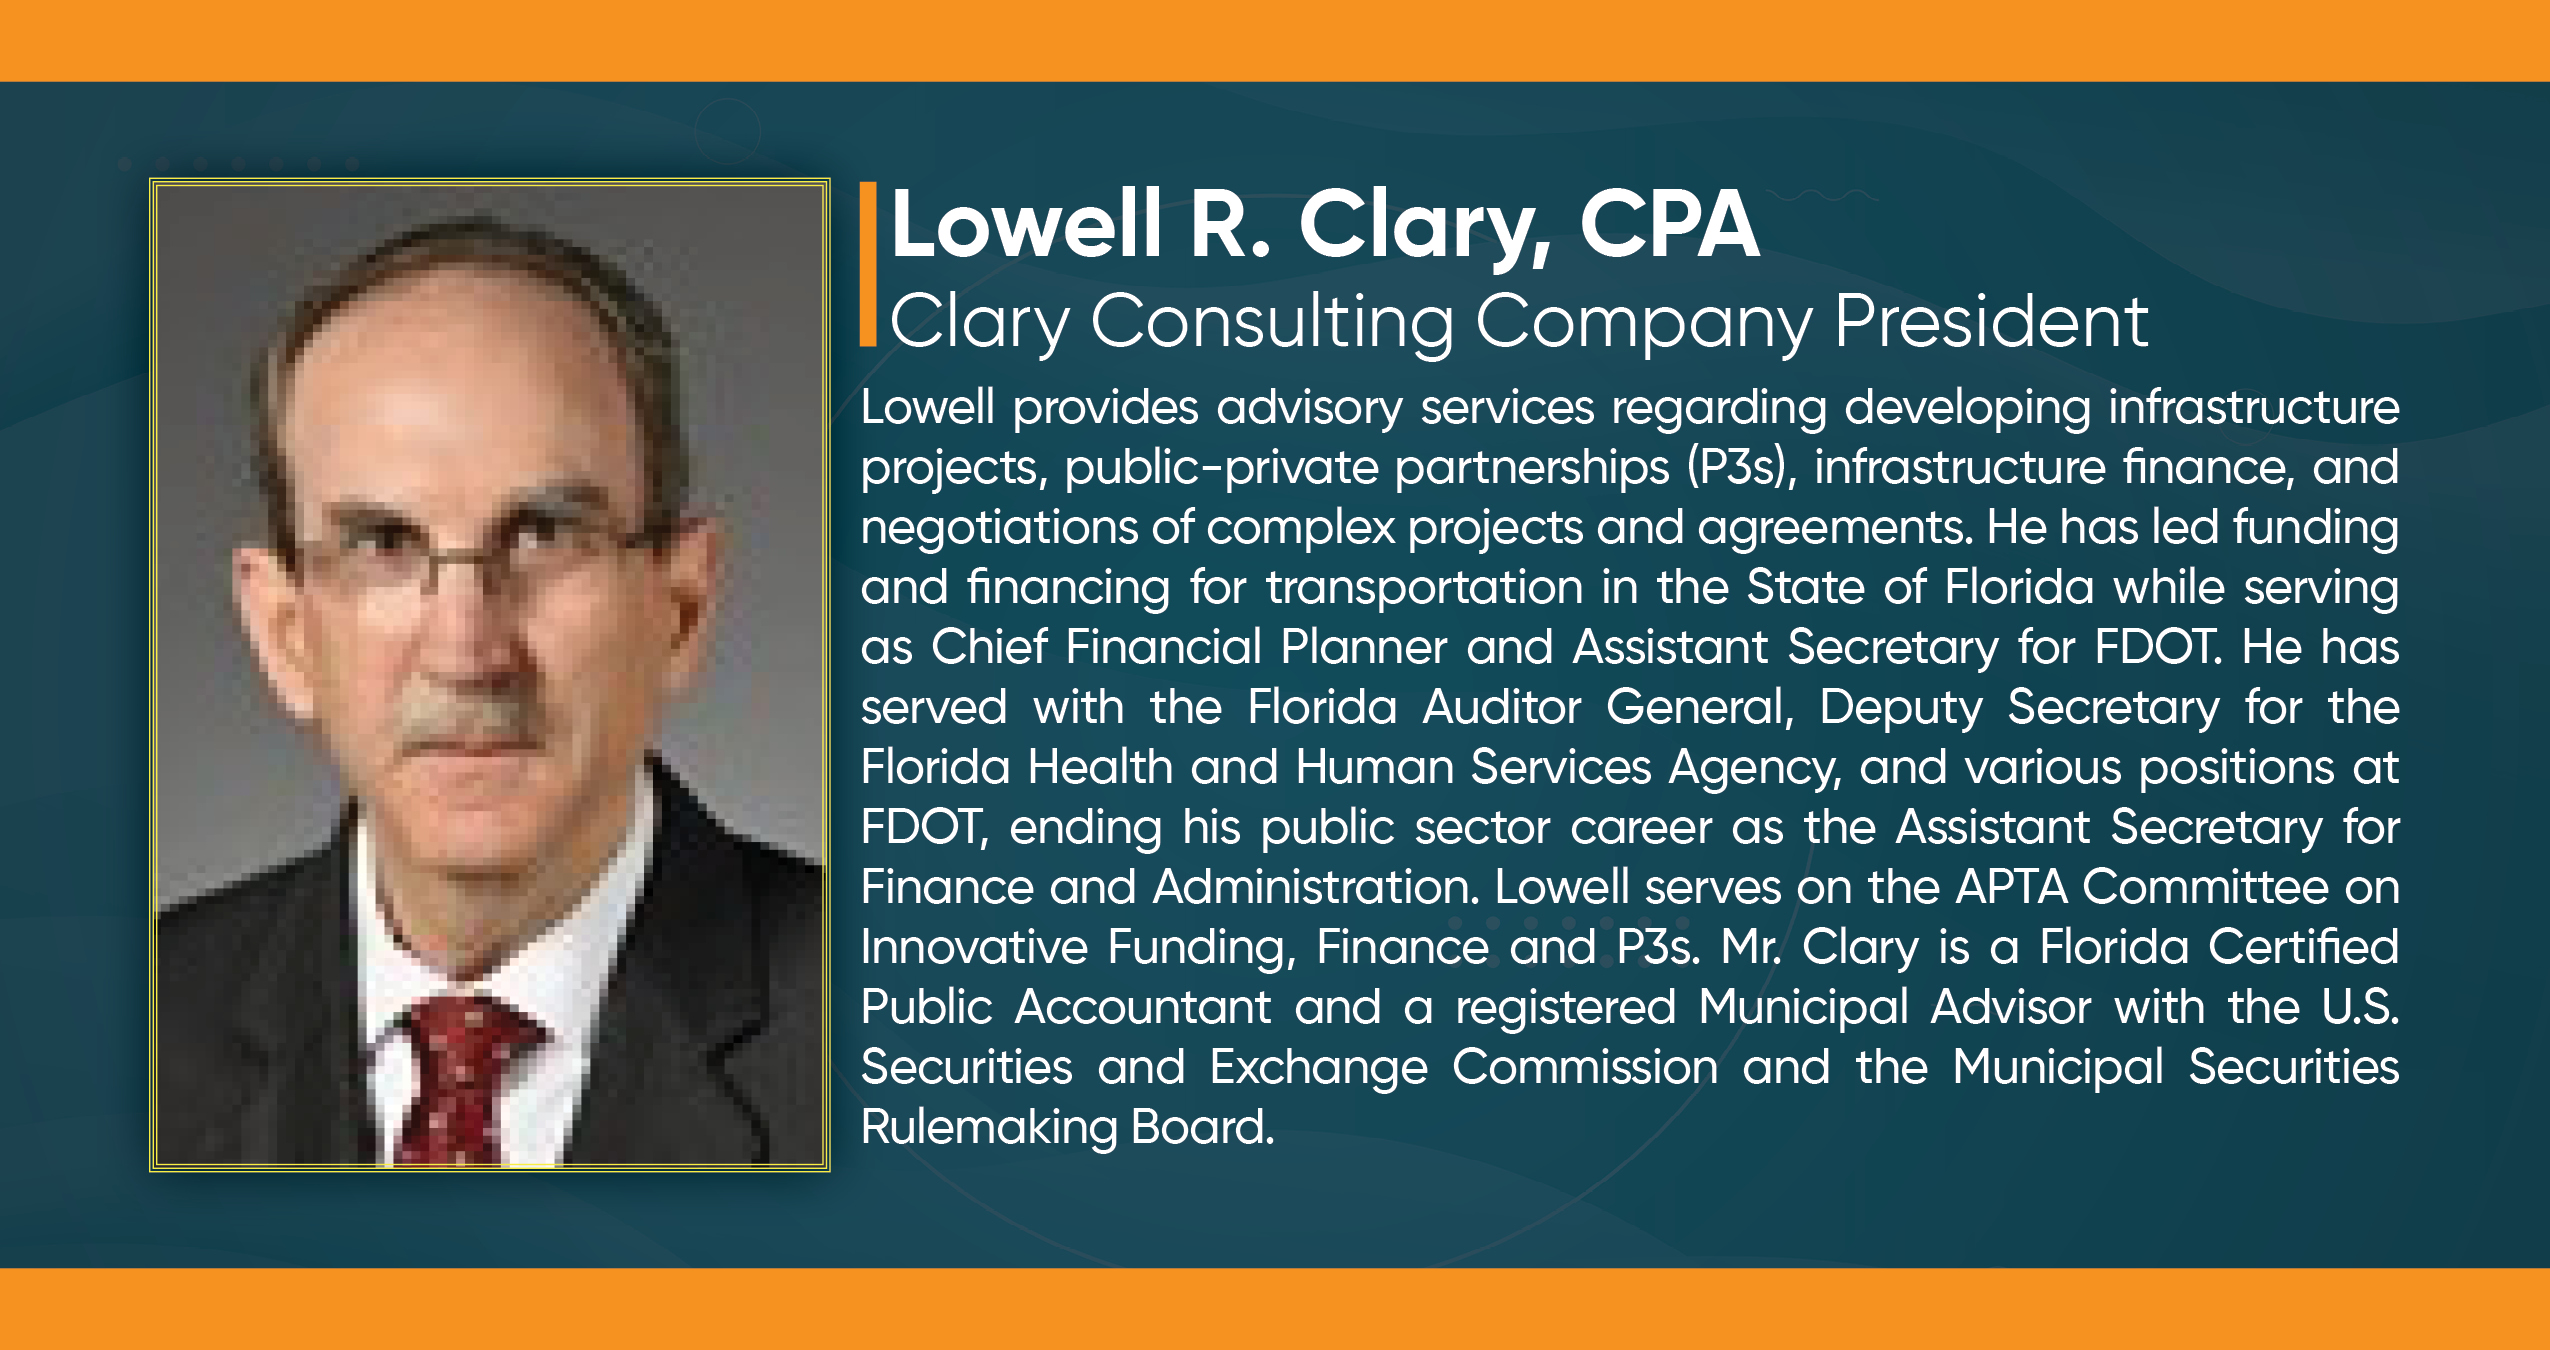 Lowell R. Clary